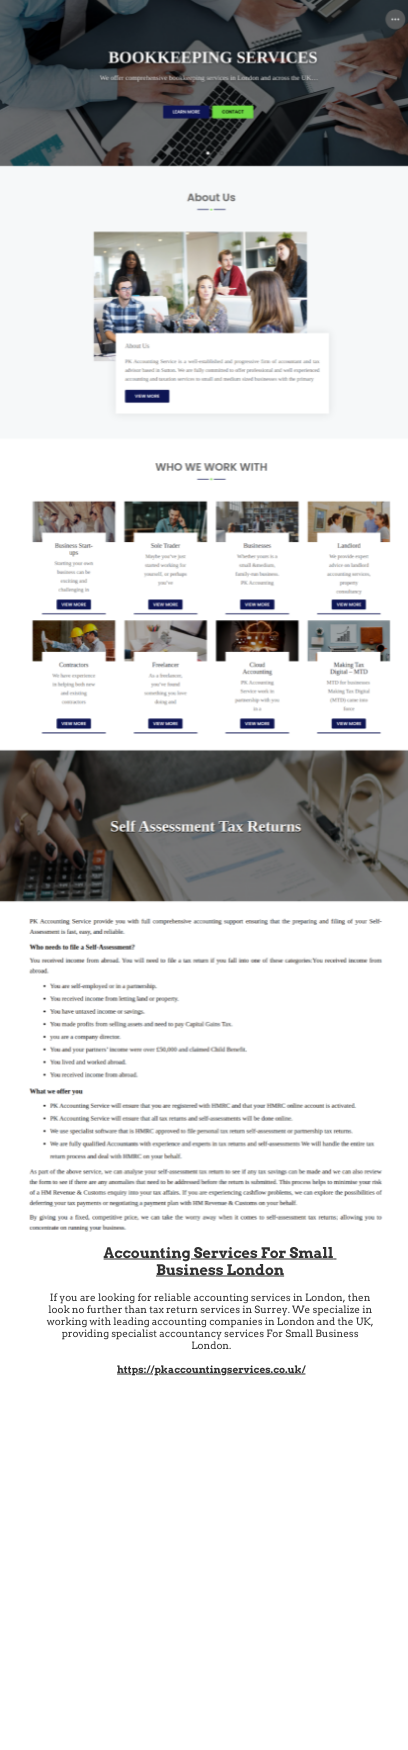 Accounting Services For Small Business London - by PK Accounting [Infographic]